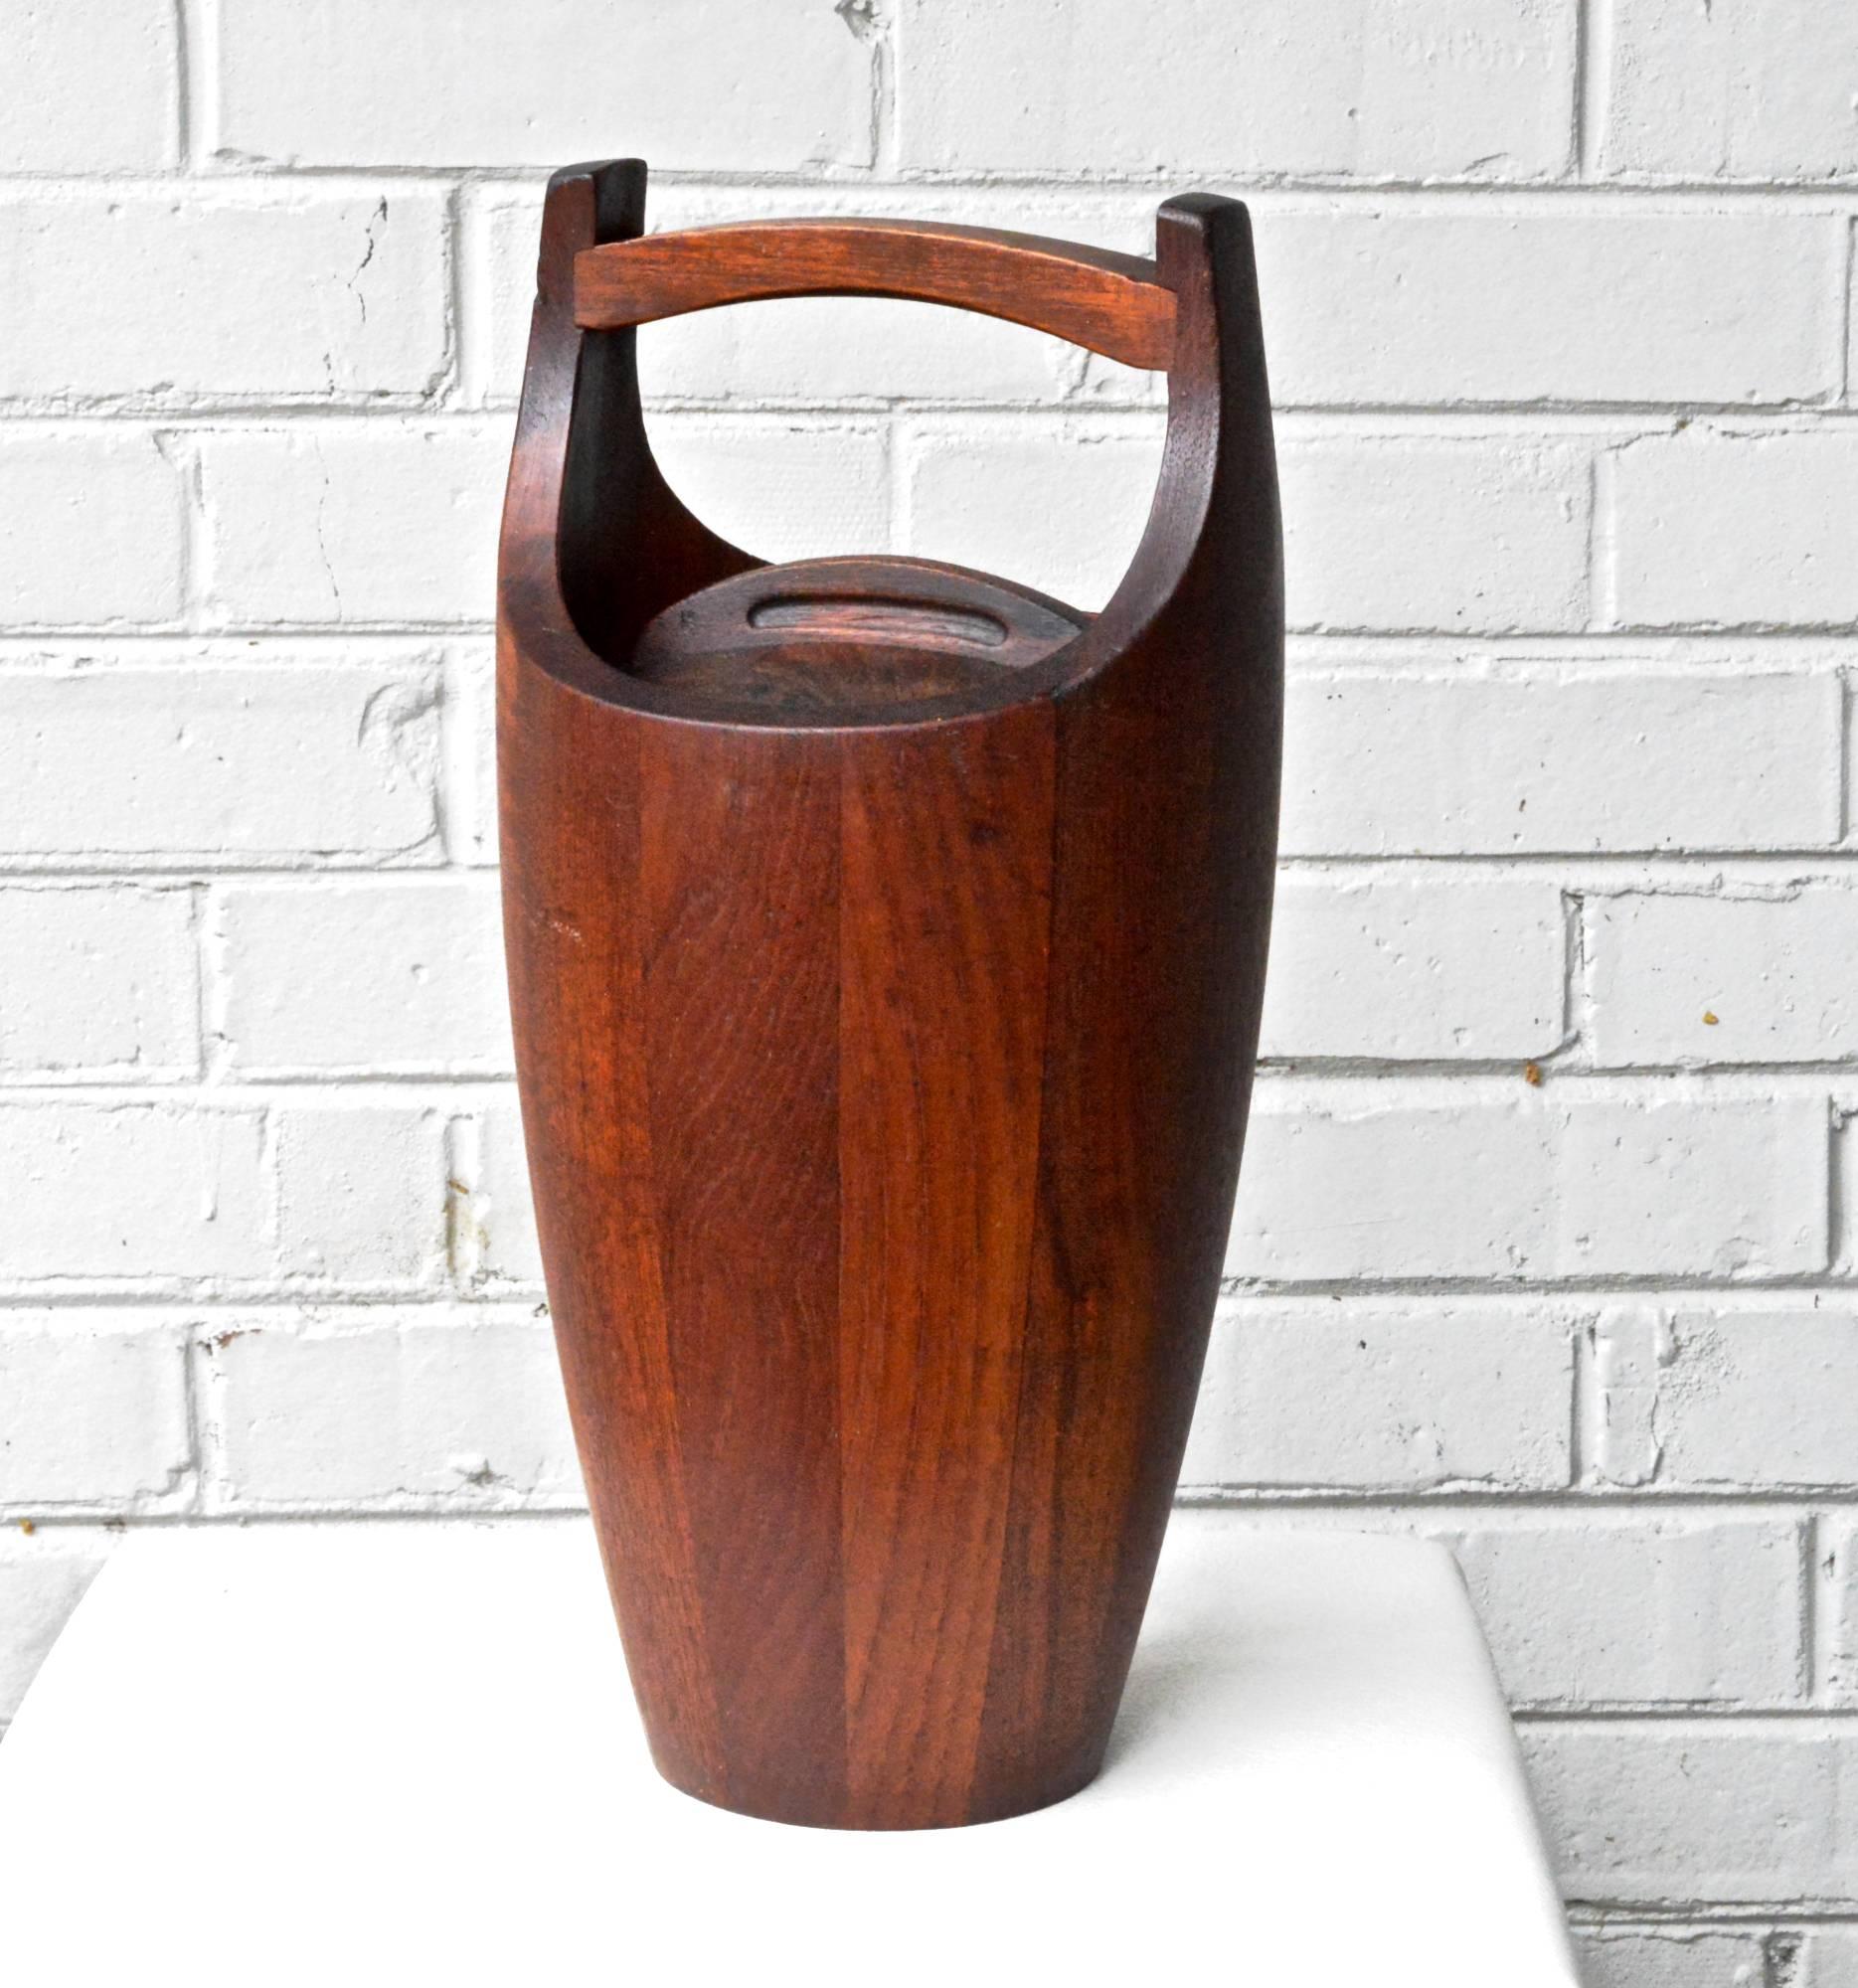 Teak Ice bucket designed by Jens Quistgaard for Dansk Corp, Denmark. The iconic and smartly constructed form is timeless and will last for years to come. This example is stamped "810" and based on deductive research comparisons is circa